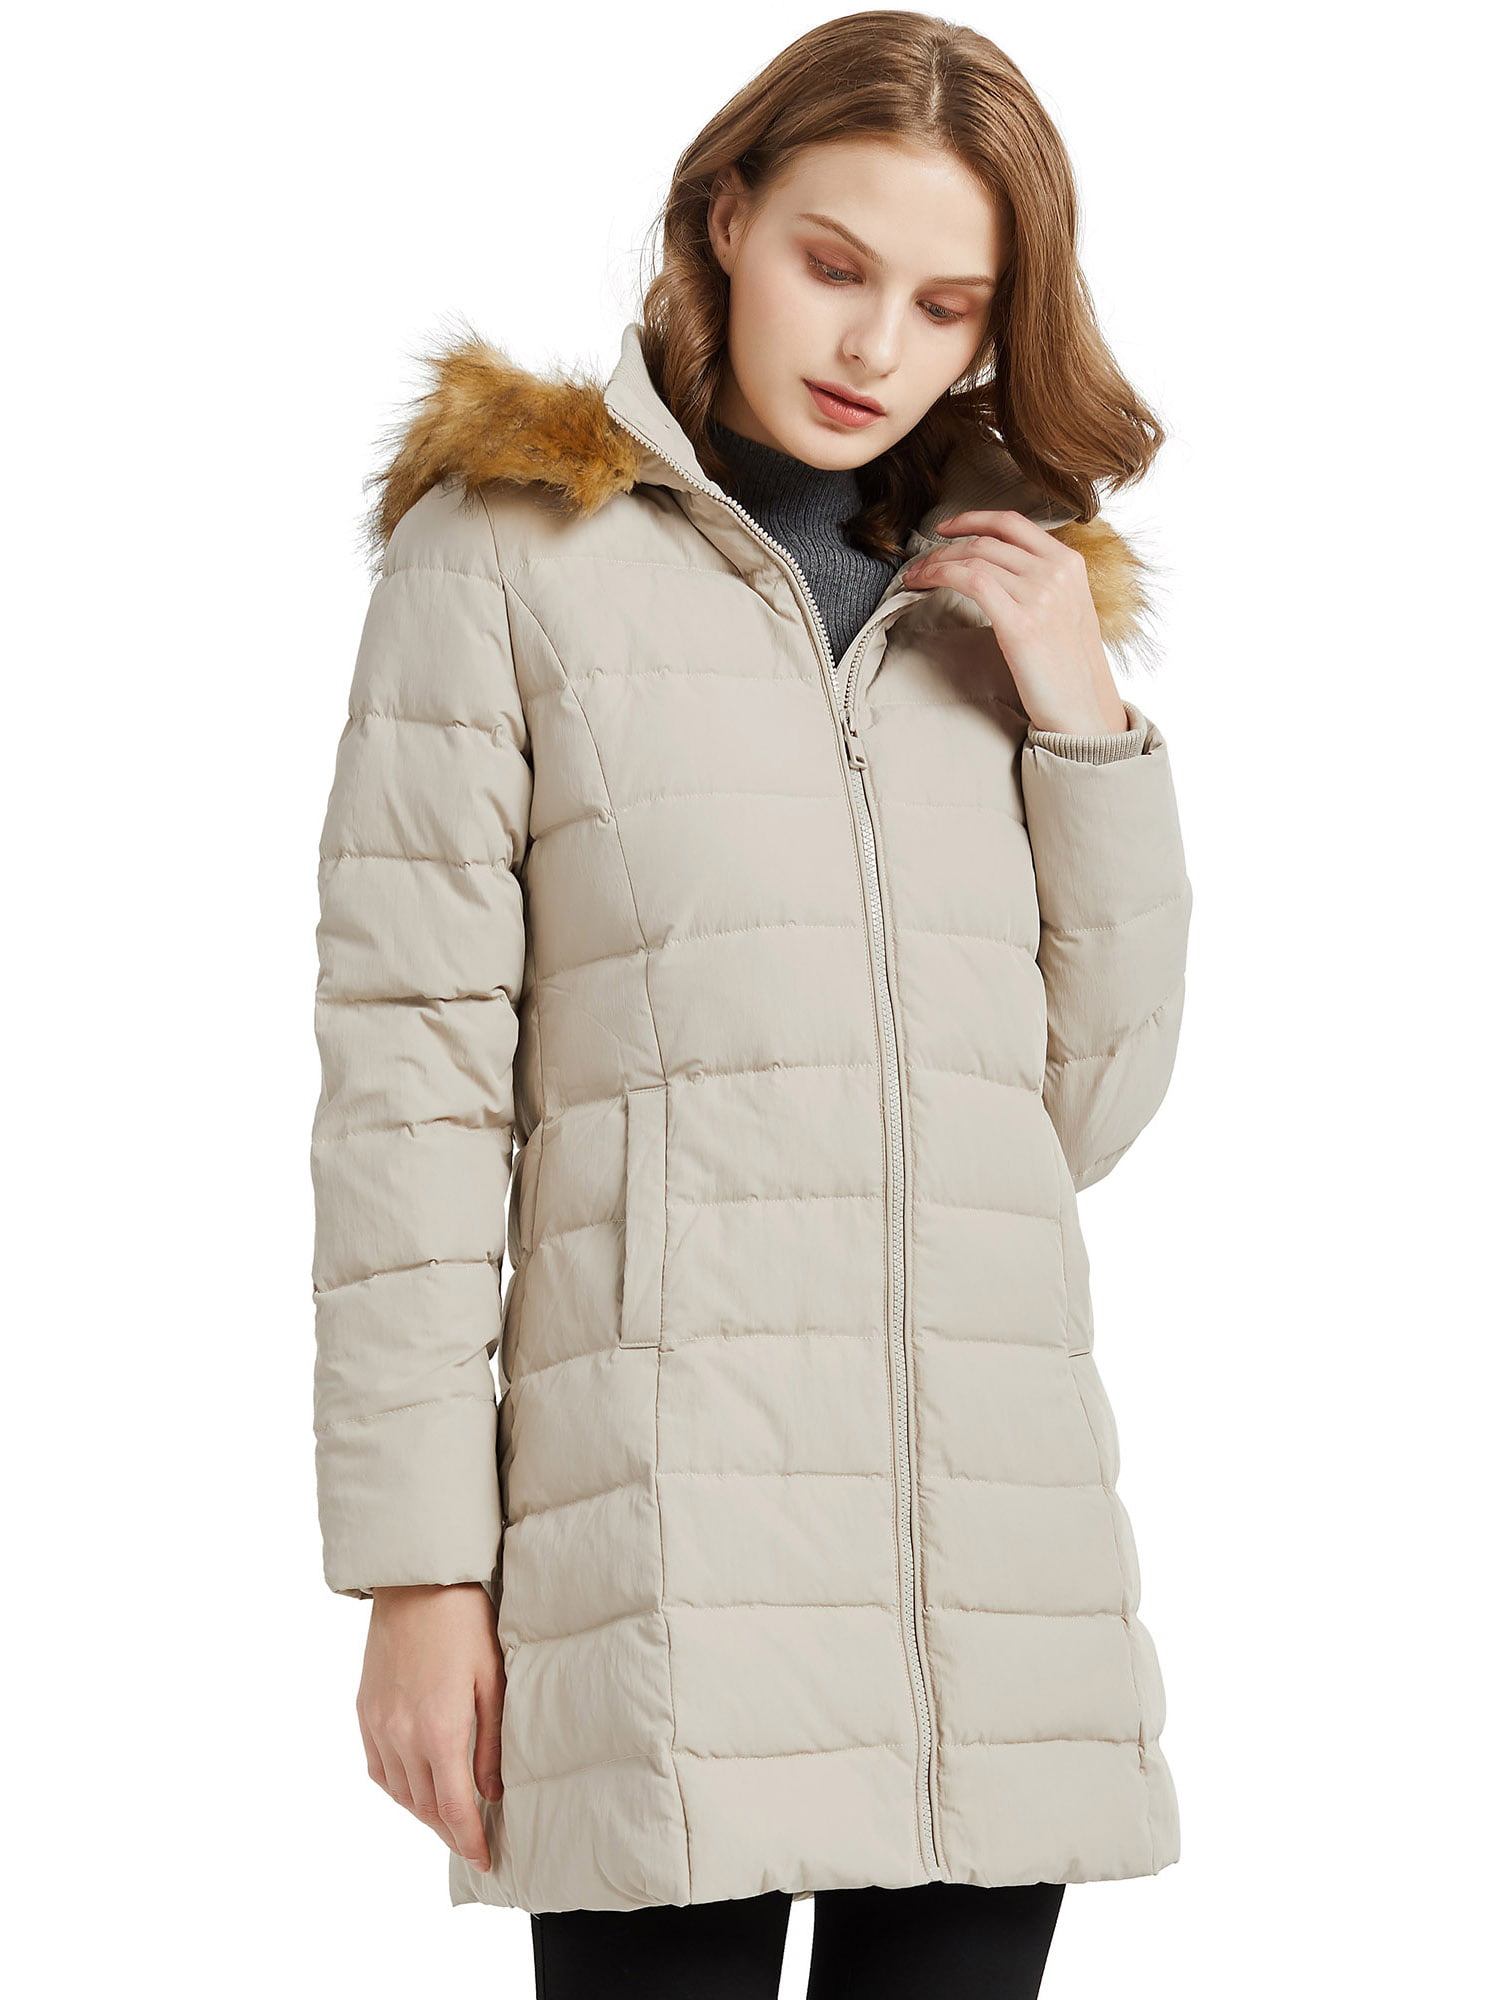 Orolay Women's Warm Down Jacket Hooded Faux Fur Thickened Coat